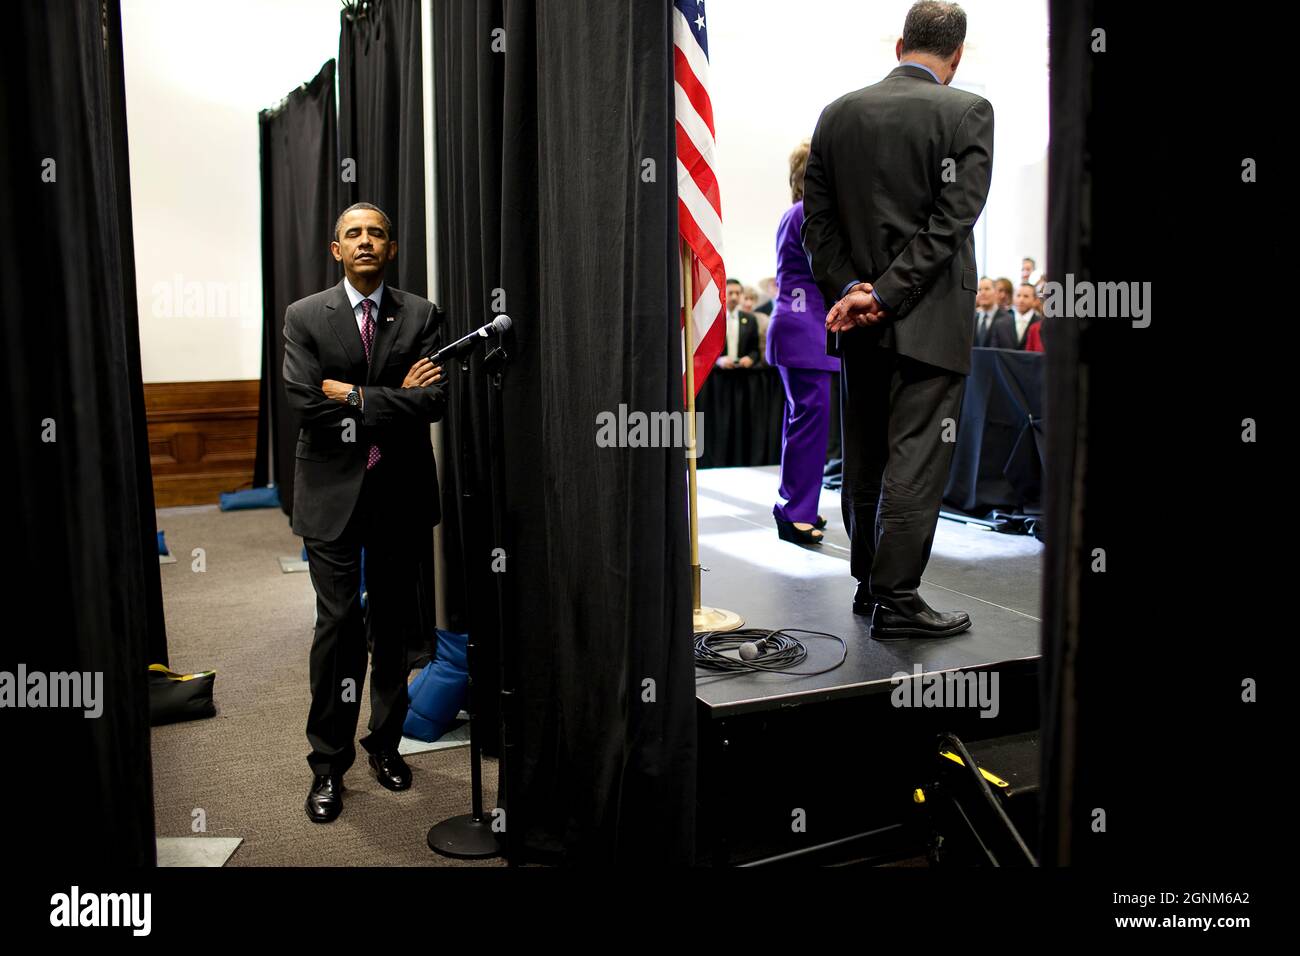 President Barack Obama waits backstage as he is introduced during a  reception for Sen. Barbara Boxer, D-Calif., at the California Science Center in Los Angeles, Calif., April 19, 2010. Former Virginia Gov. Tim Kaine, Democratic National Committee (DNC) Chair, and Sen. Boxer are onstage. (Official White House Photo by Pete Souza) This official White House photograph is being made available only for publication by news organizations and/or for personal use printing by the subject(s) of the photograph. The photograph may not be manipulated in any way and may not be used in commercial or politica Stock Photo